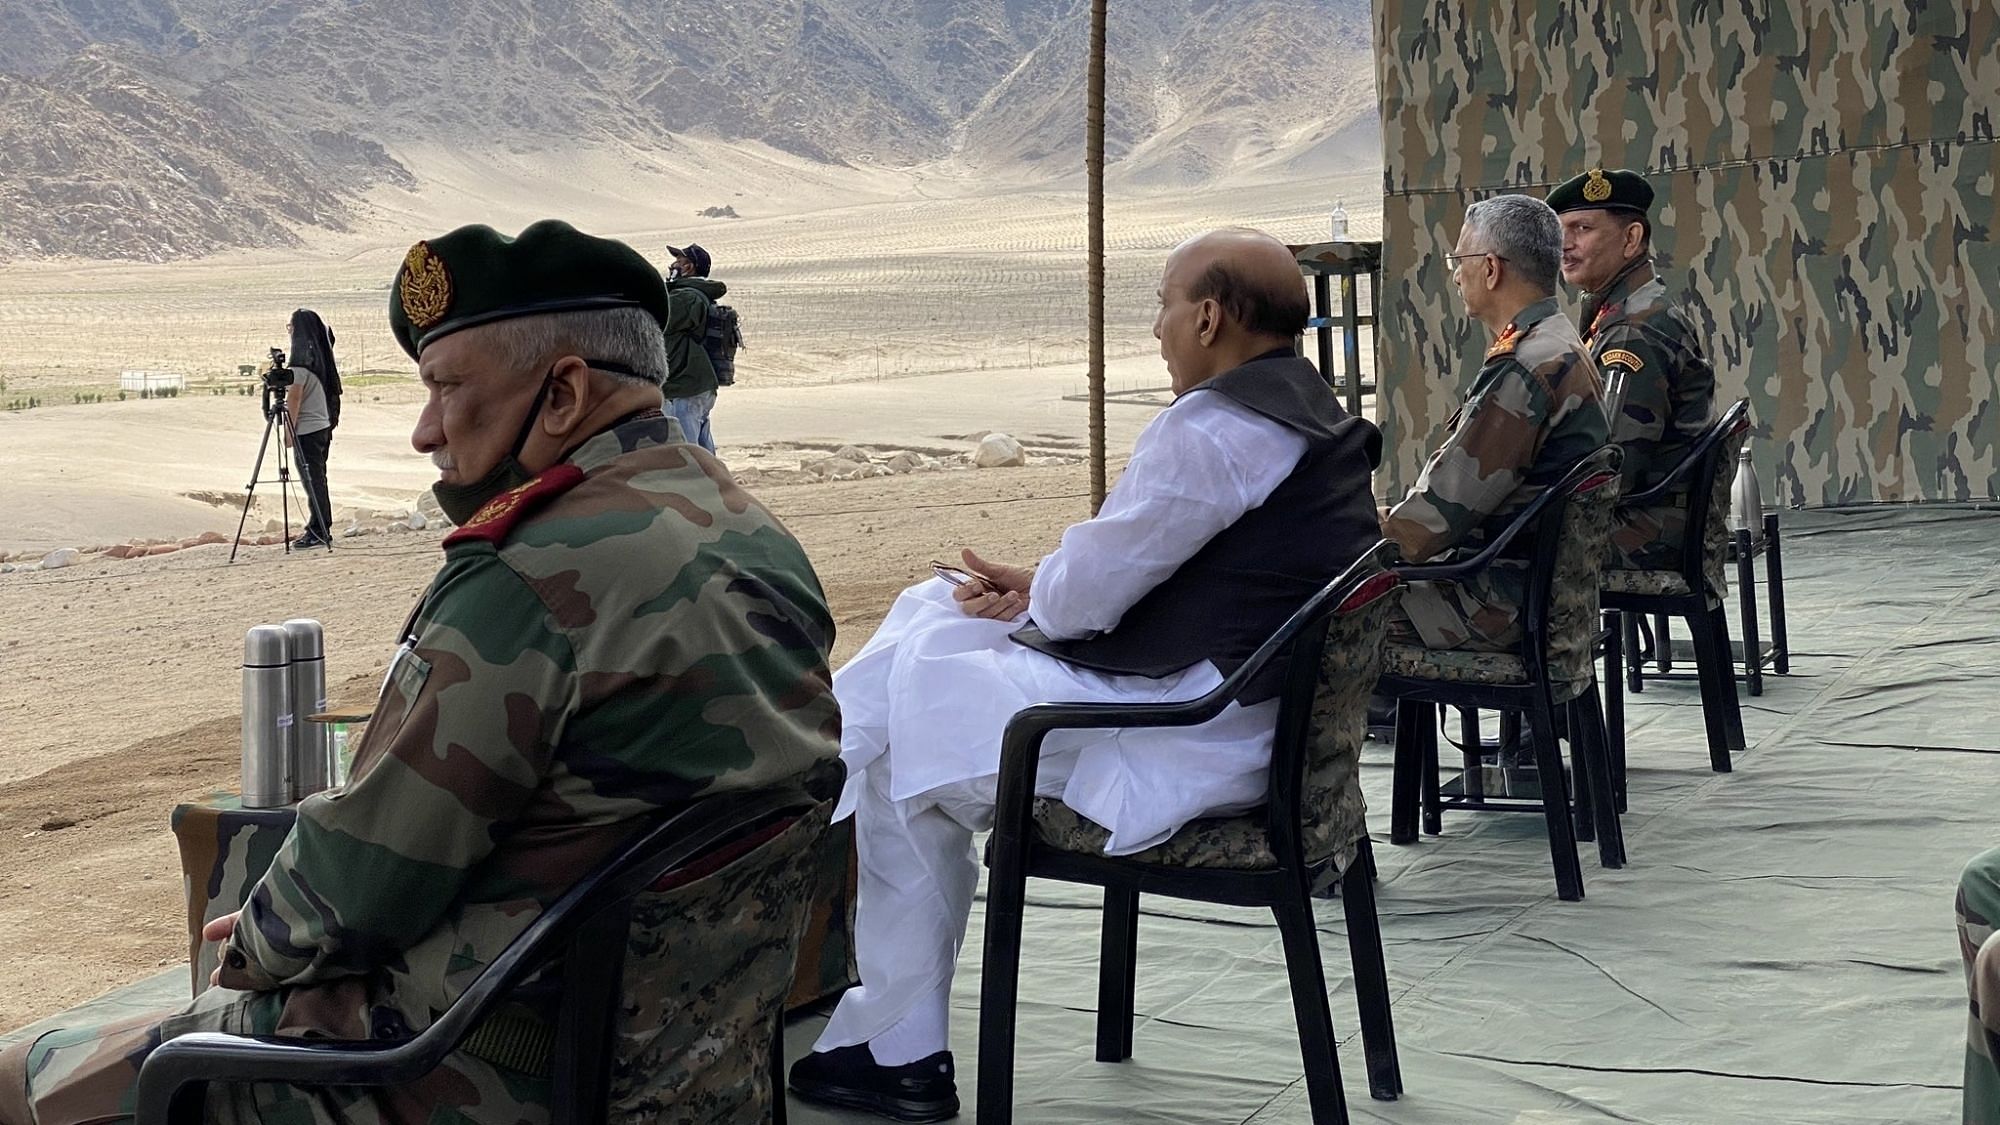 Defence Minister Rajnath Singh accompanied by Chief of Defence Staff General Bipin Rawat and Army Chief General Manoj Mukund Naravane.